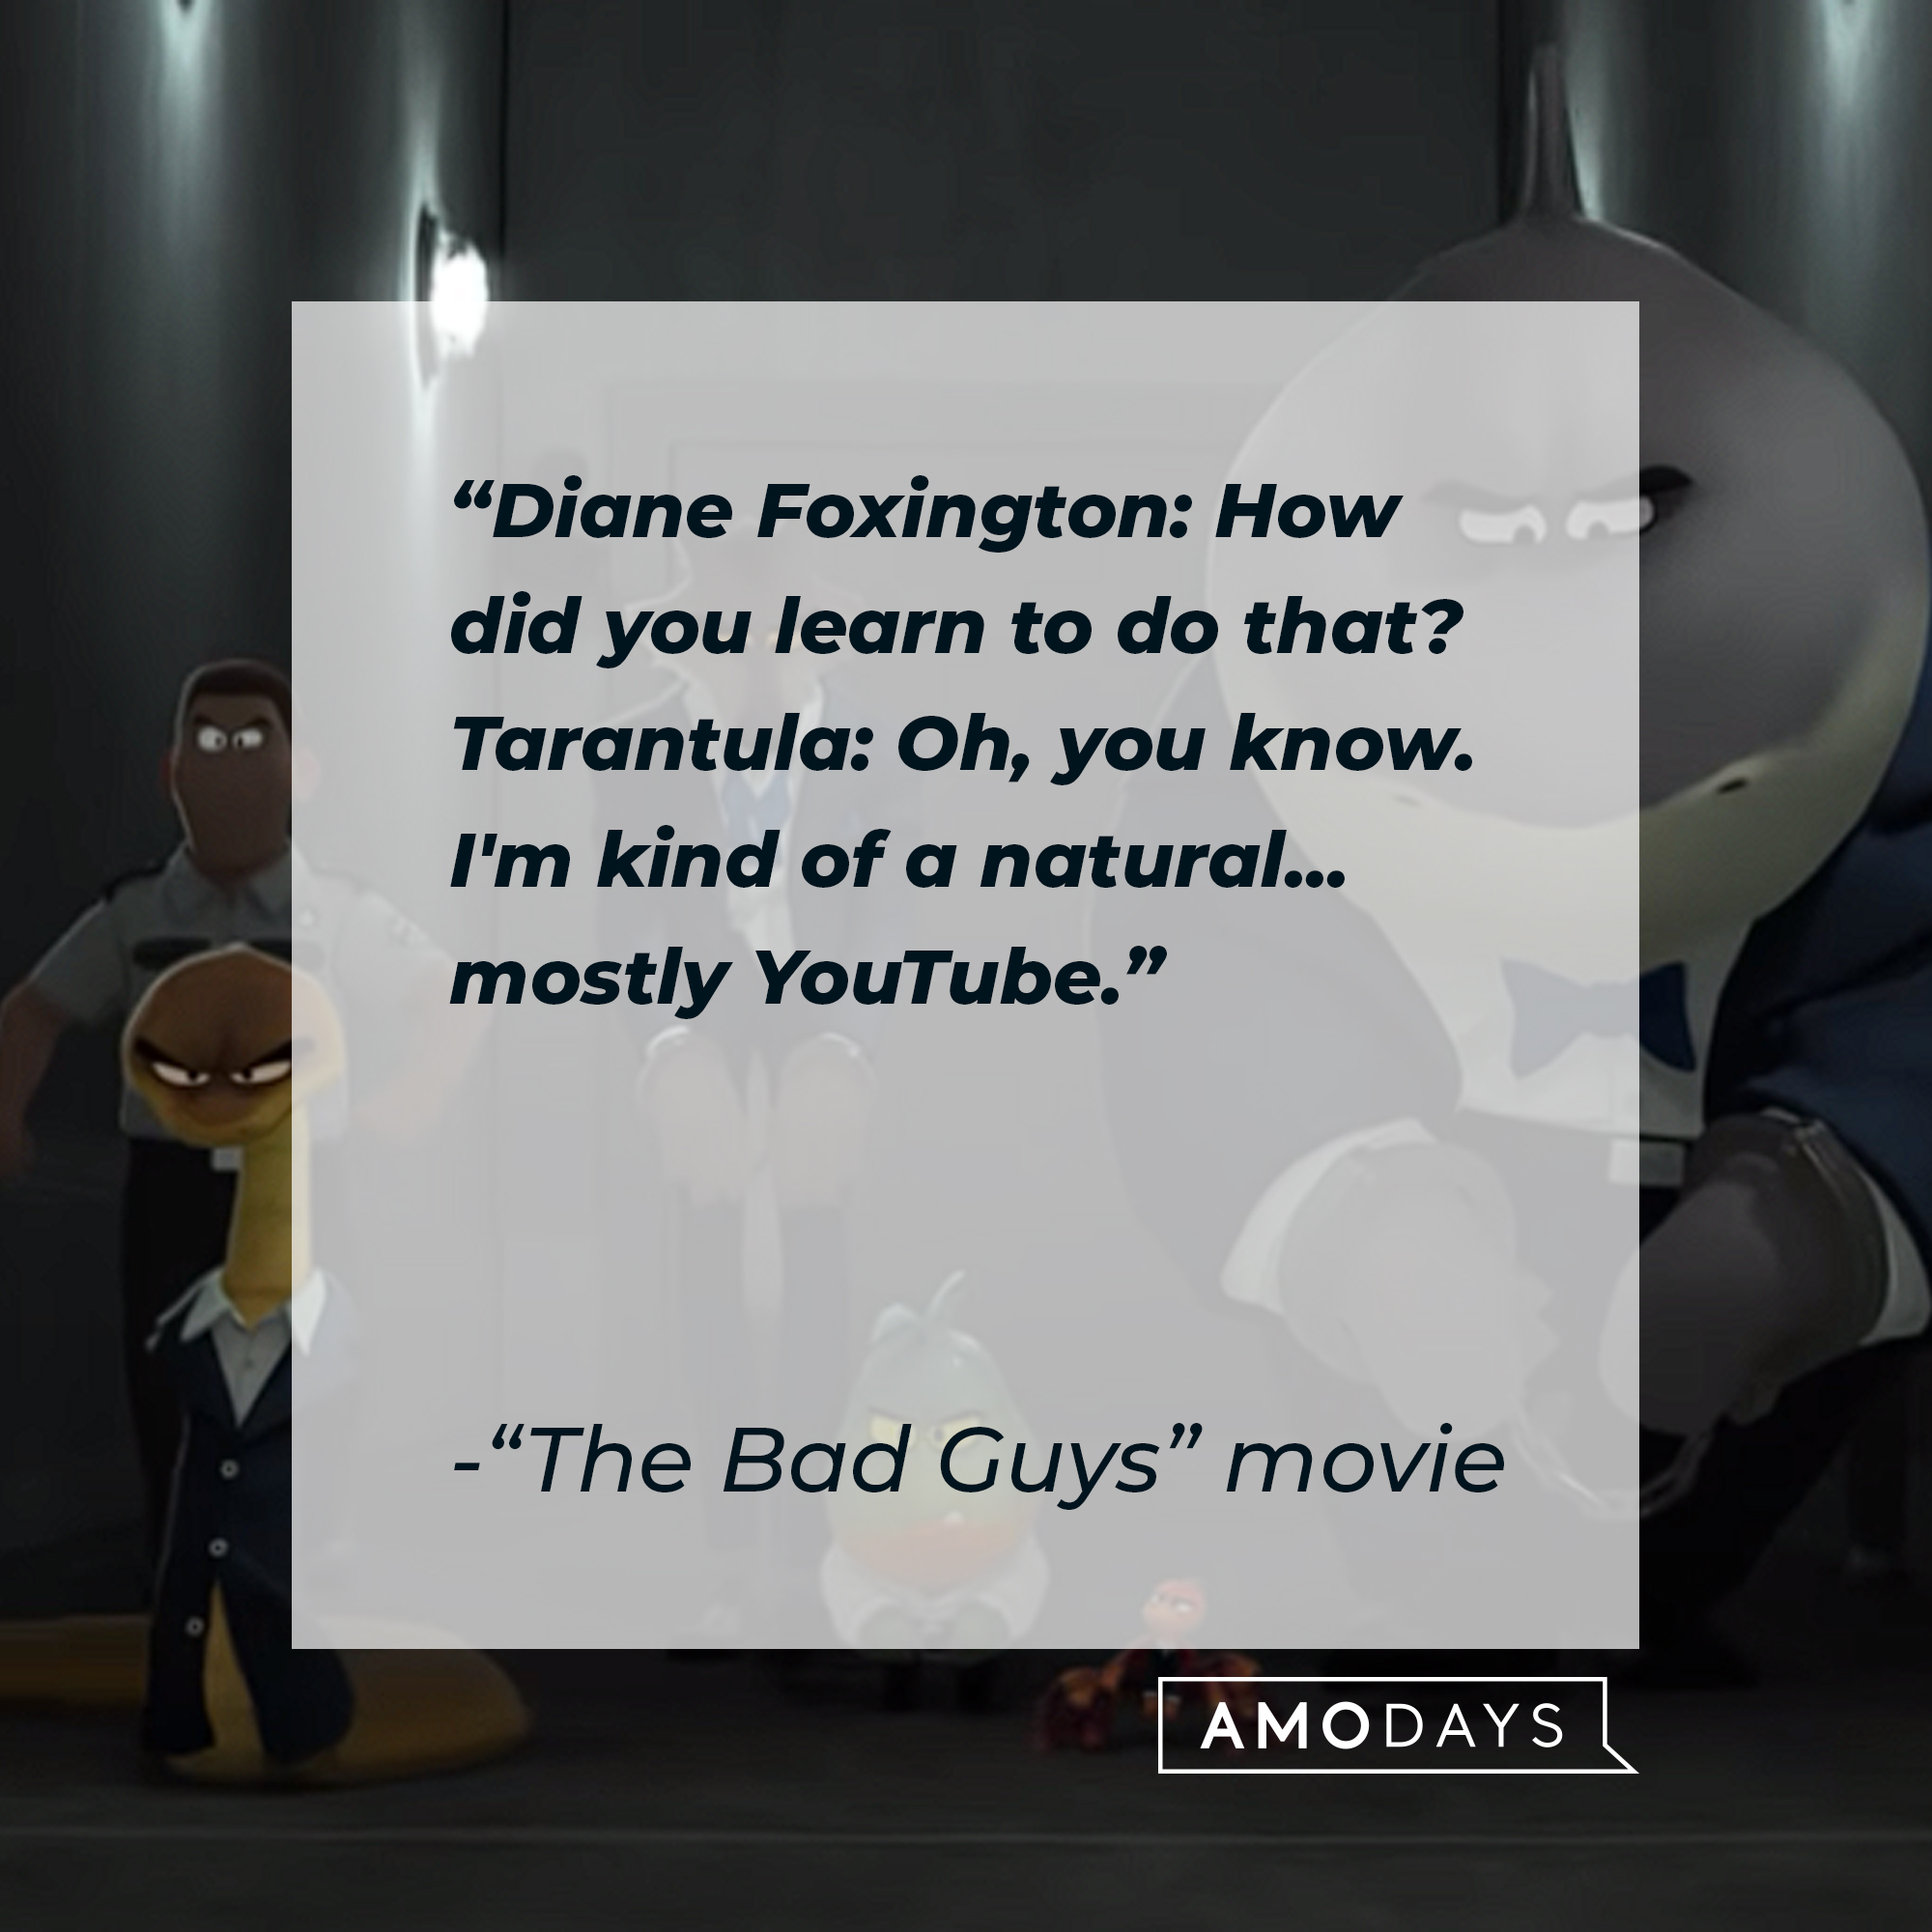 "The Bad Guys" movie quote: "Diane Foxington: How did you learn to do that? Tarantula: Oh, you know. I'm kind of a natural... mostly YouTube." | Source: youtube.com/UniversalPictures